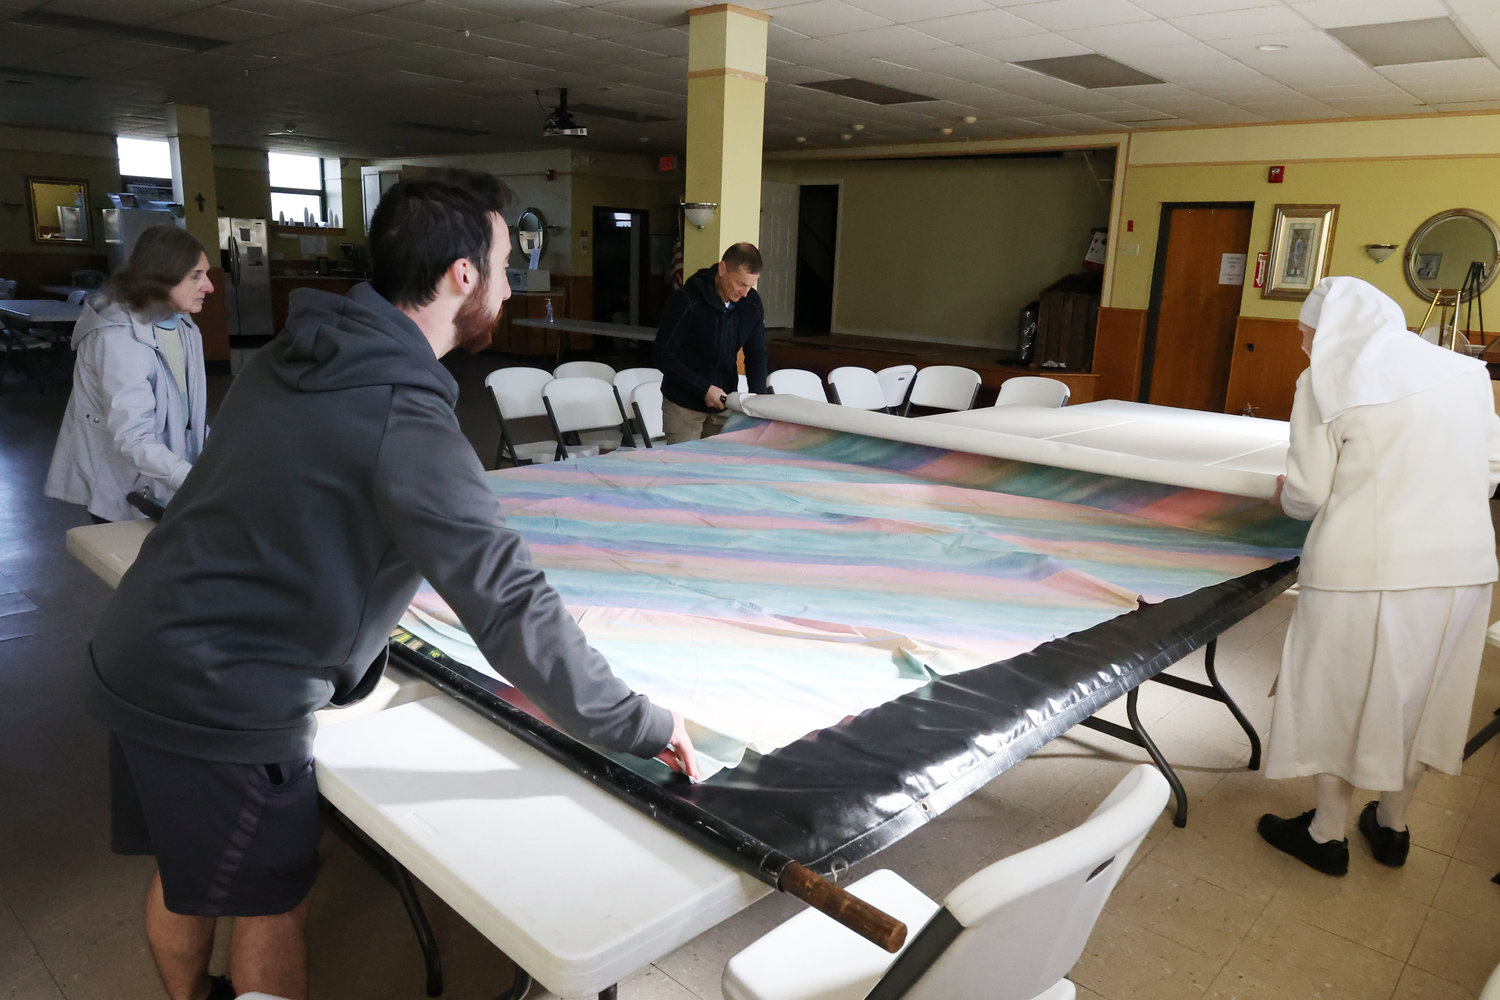 From left, Marie Magill, Jacob Losardo, Marc Auger and Sister Grace Coffee unpack on Saturday the 8-foot by 12-foot painted image of Divine Mercy so it can be displayed in a frame in the foyer of St. Theresa Church in advance of Divine Mercy Sunday, April 16.